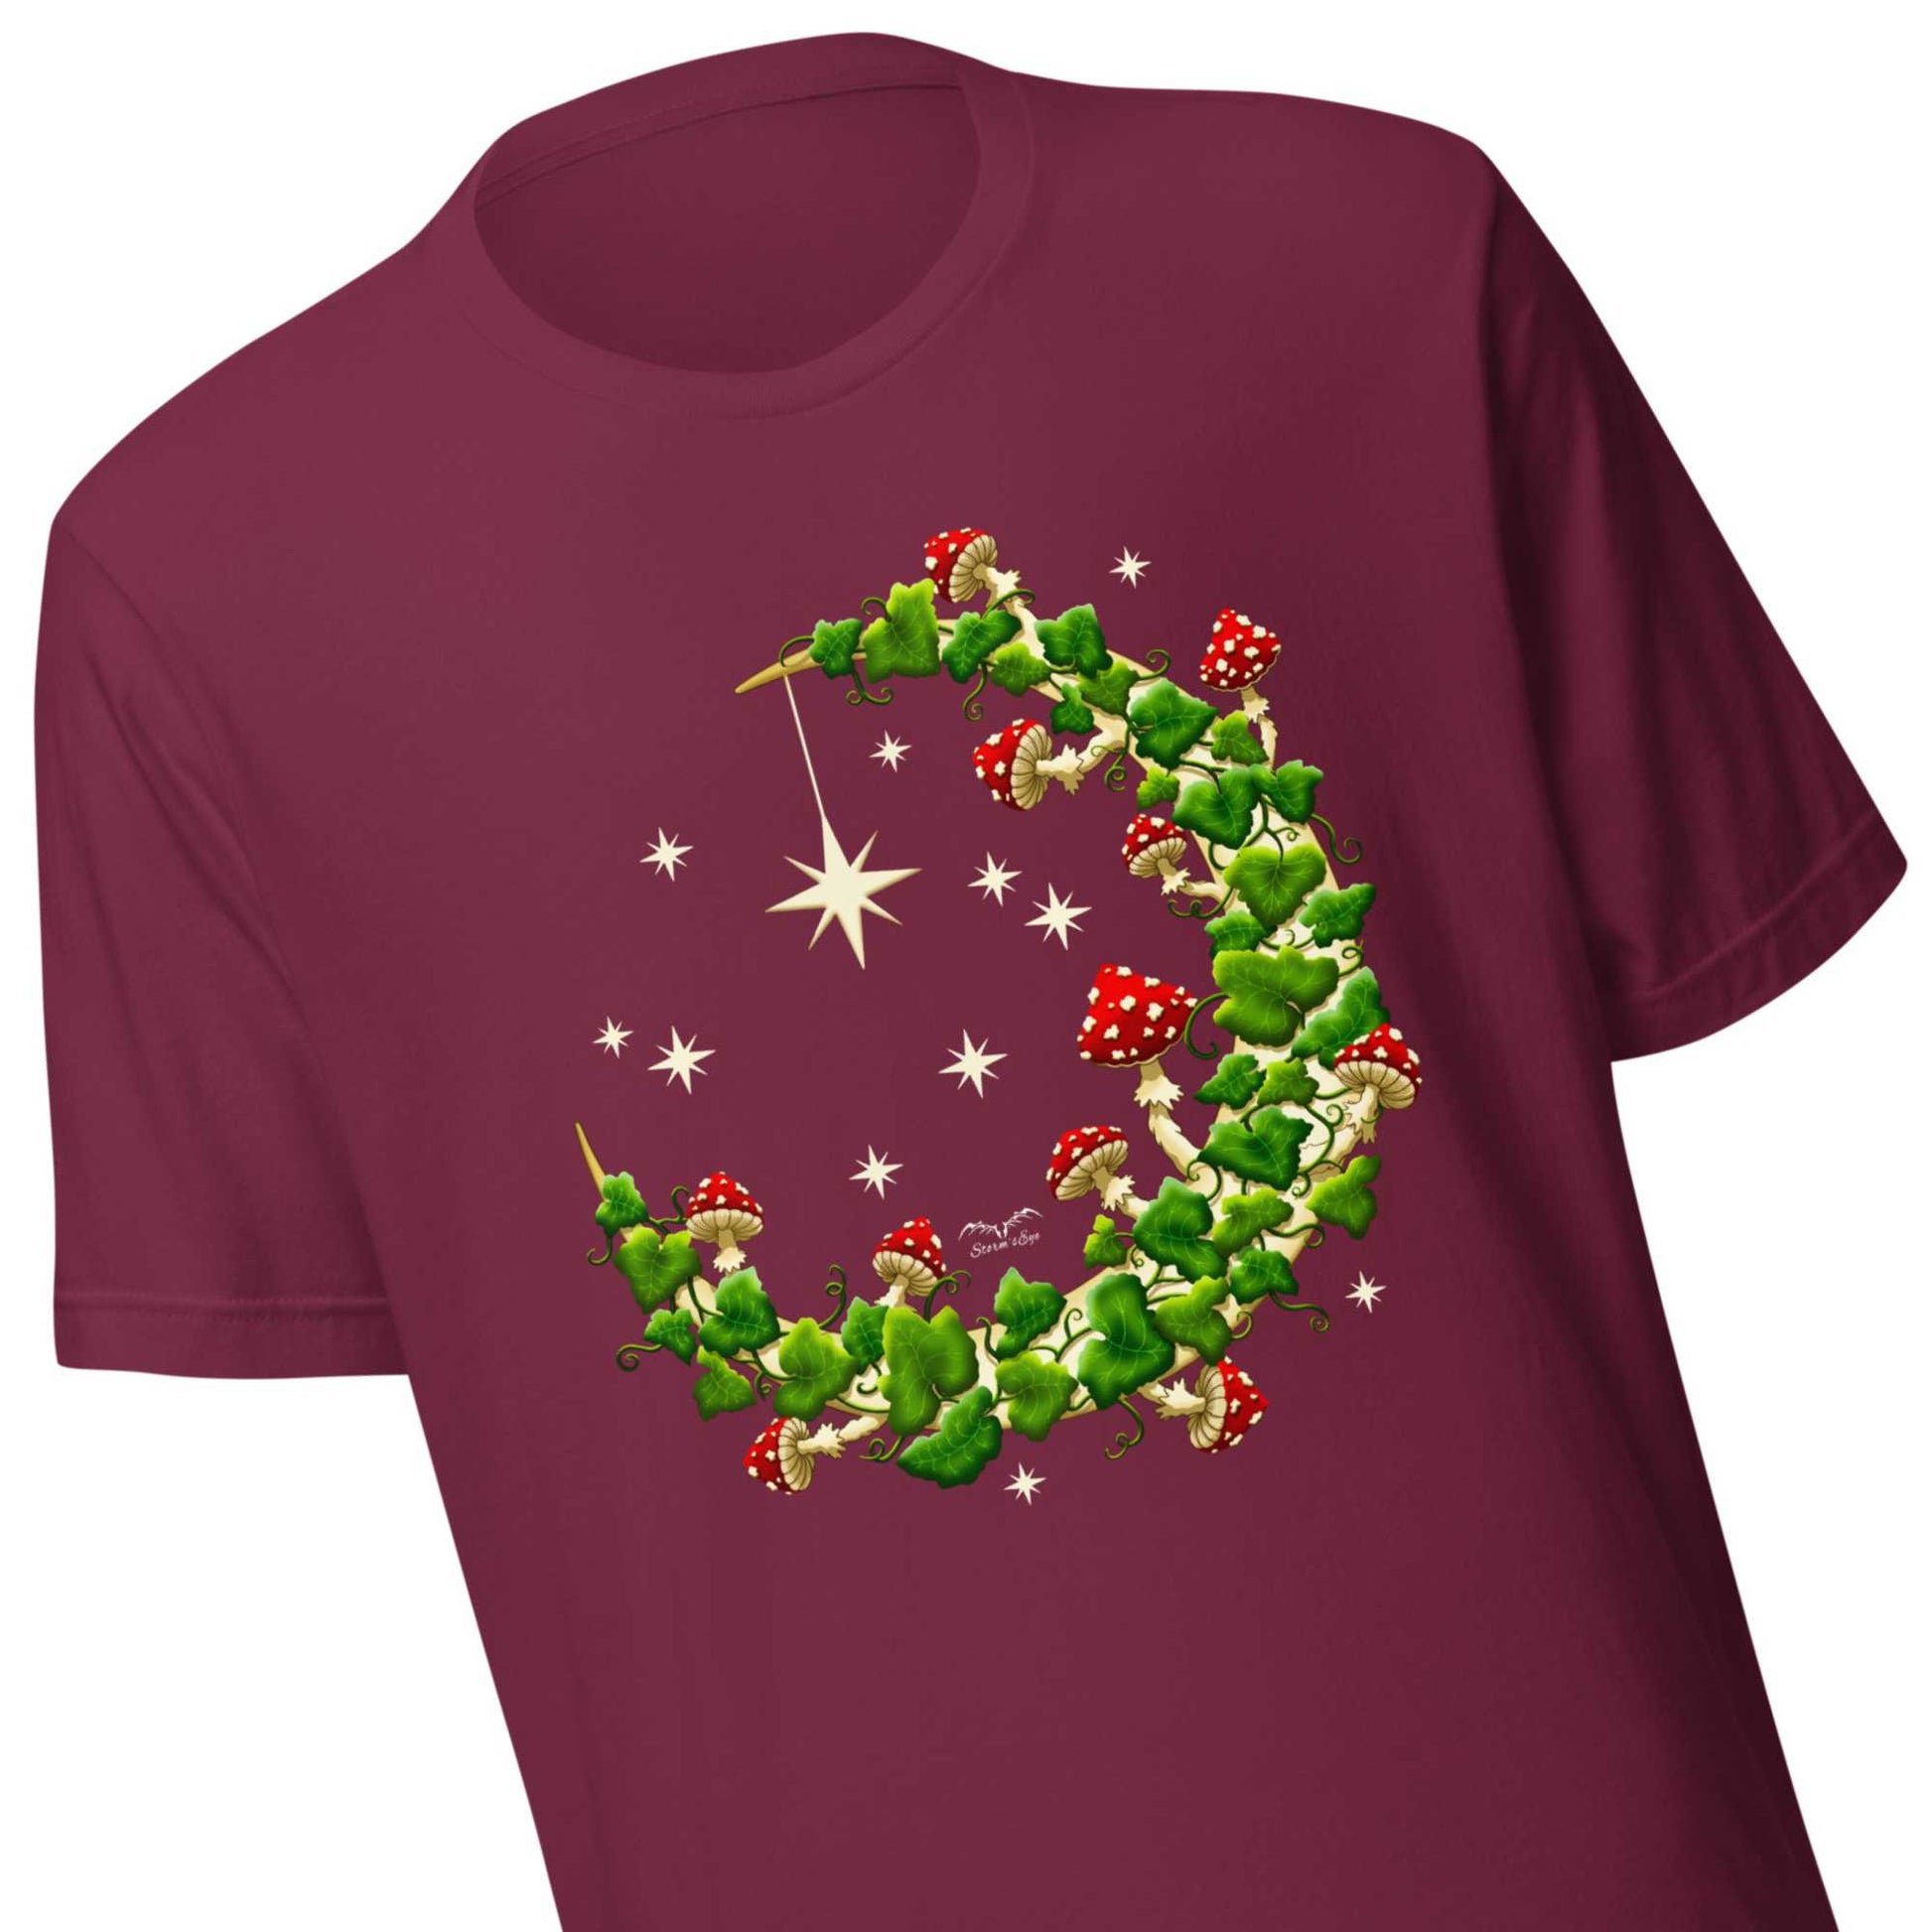 stormseye design mushroom moon witchy cottagecore T shirt, colour, detail view maroon red